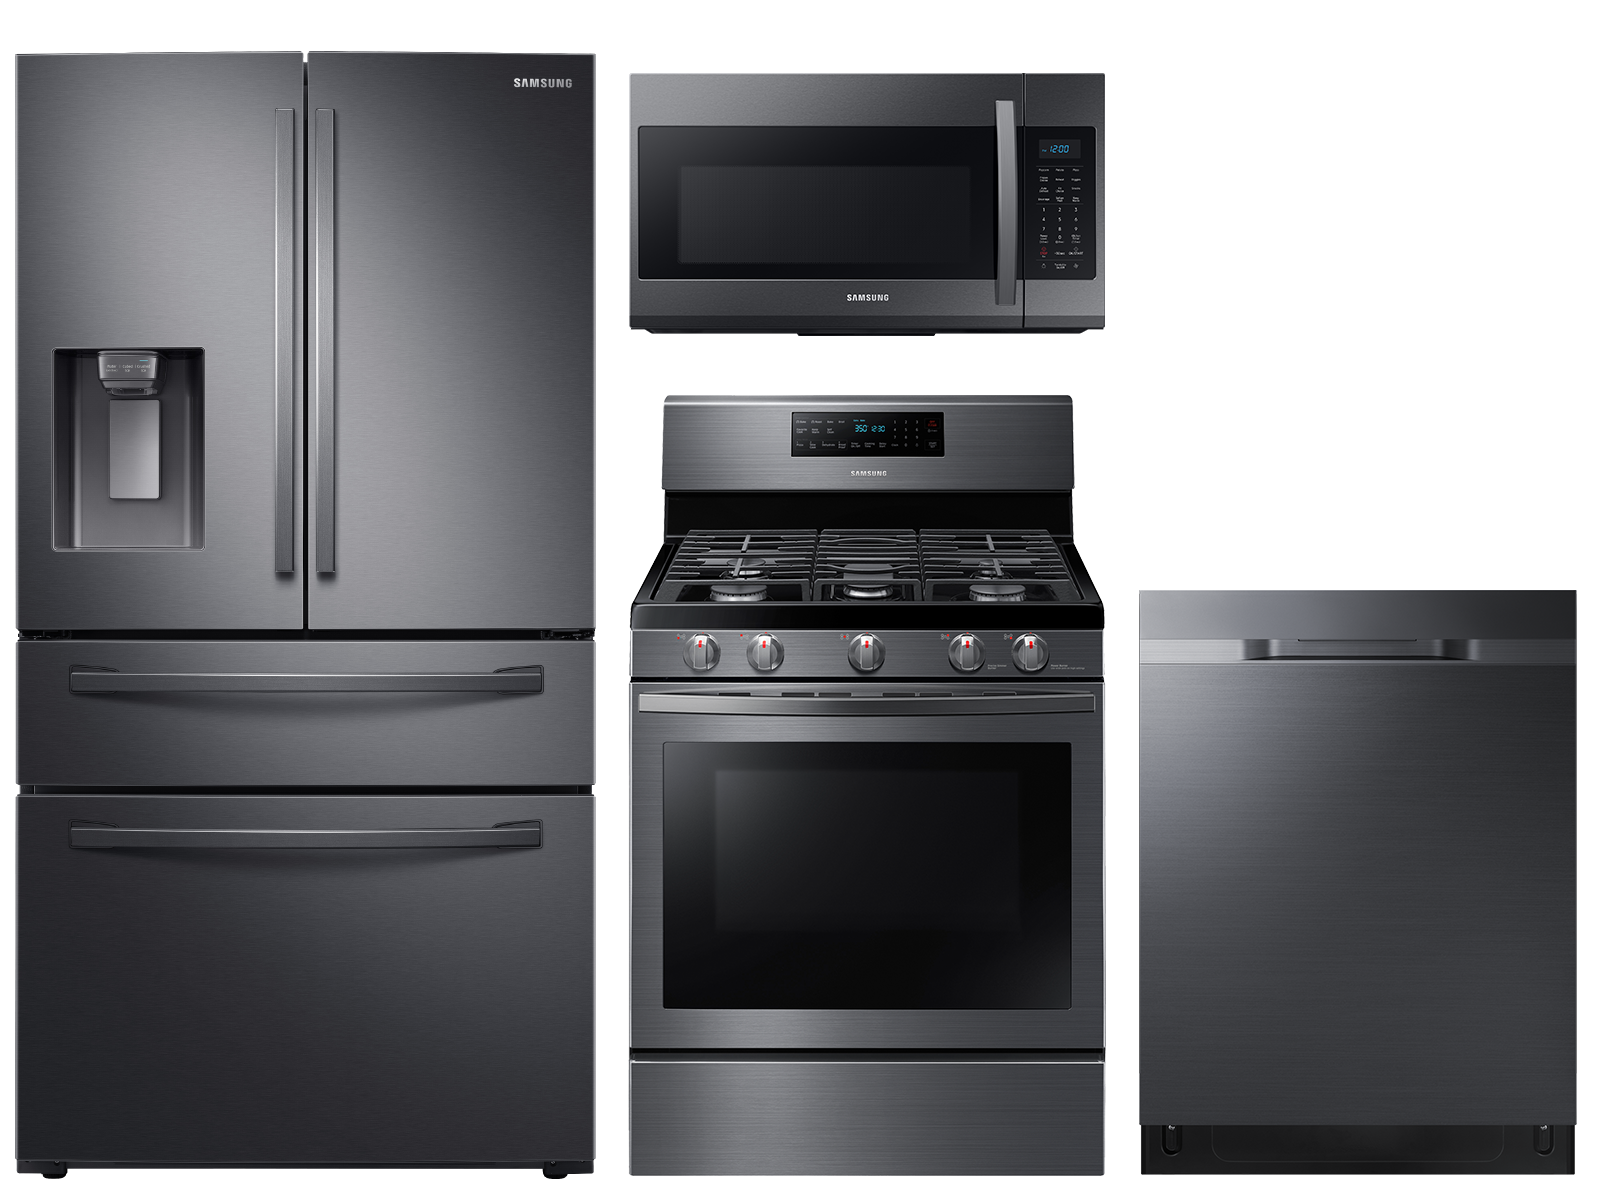 Samsung Large Capacity 4-door Refrigerator + Gas Range with Convection + StormWash™ Dishwasher + Microwave in Black Stainless(BNDL-1604350027776)